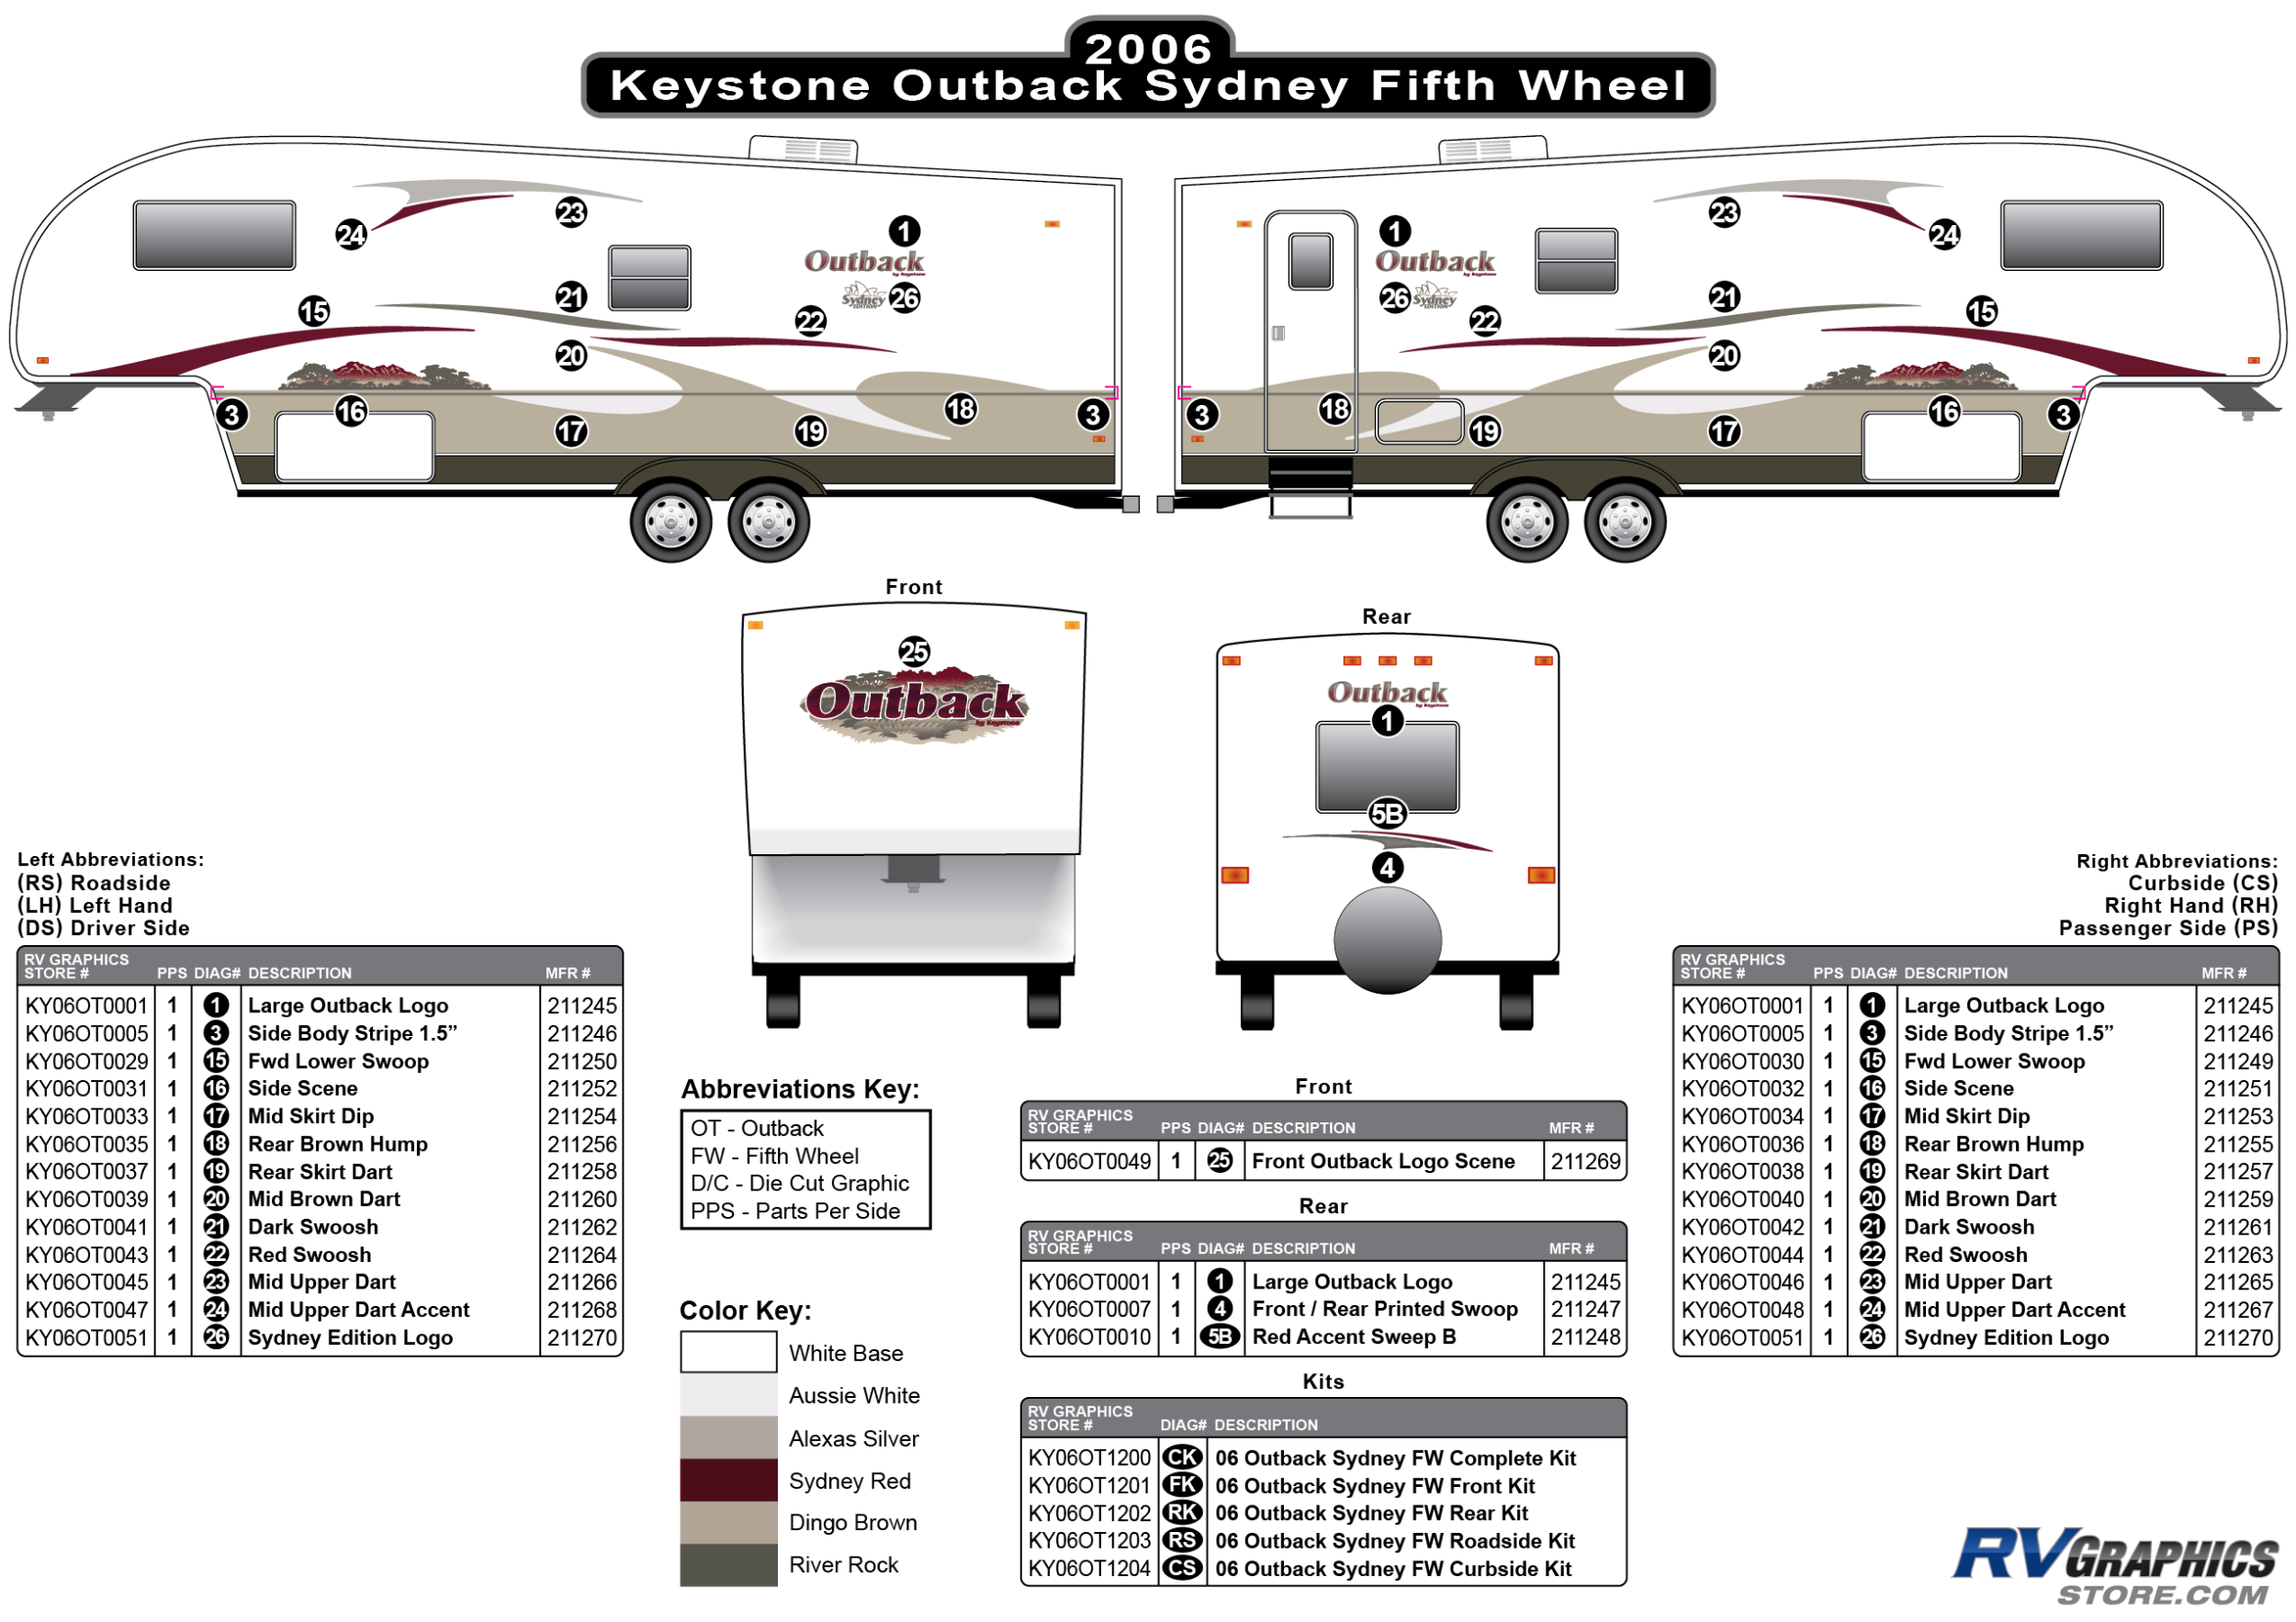 Outback - 2006-2007 Outback Fifth Wheel Sydney Edition